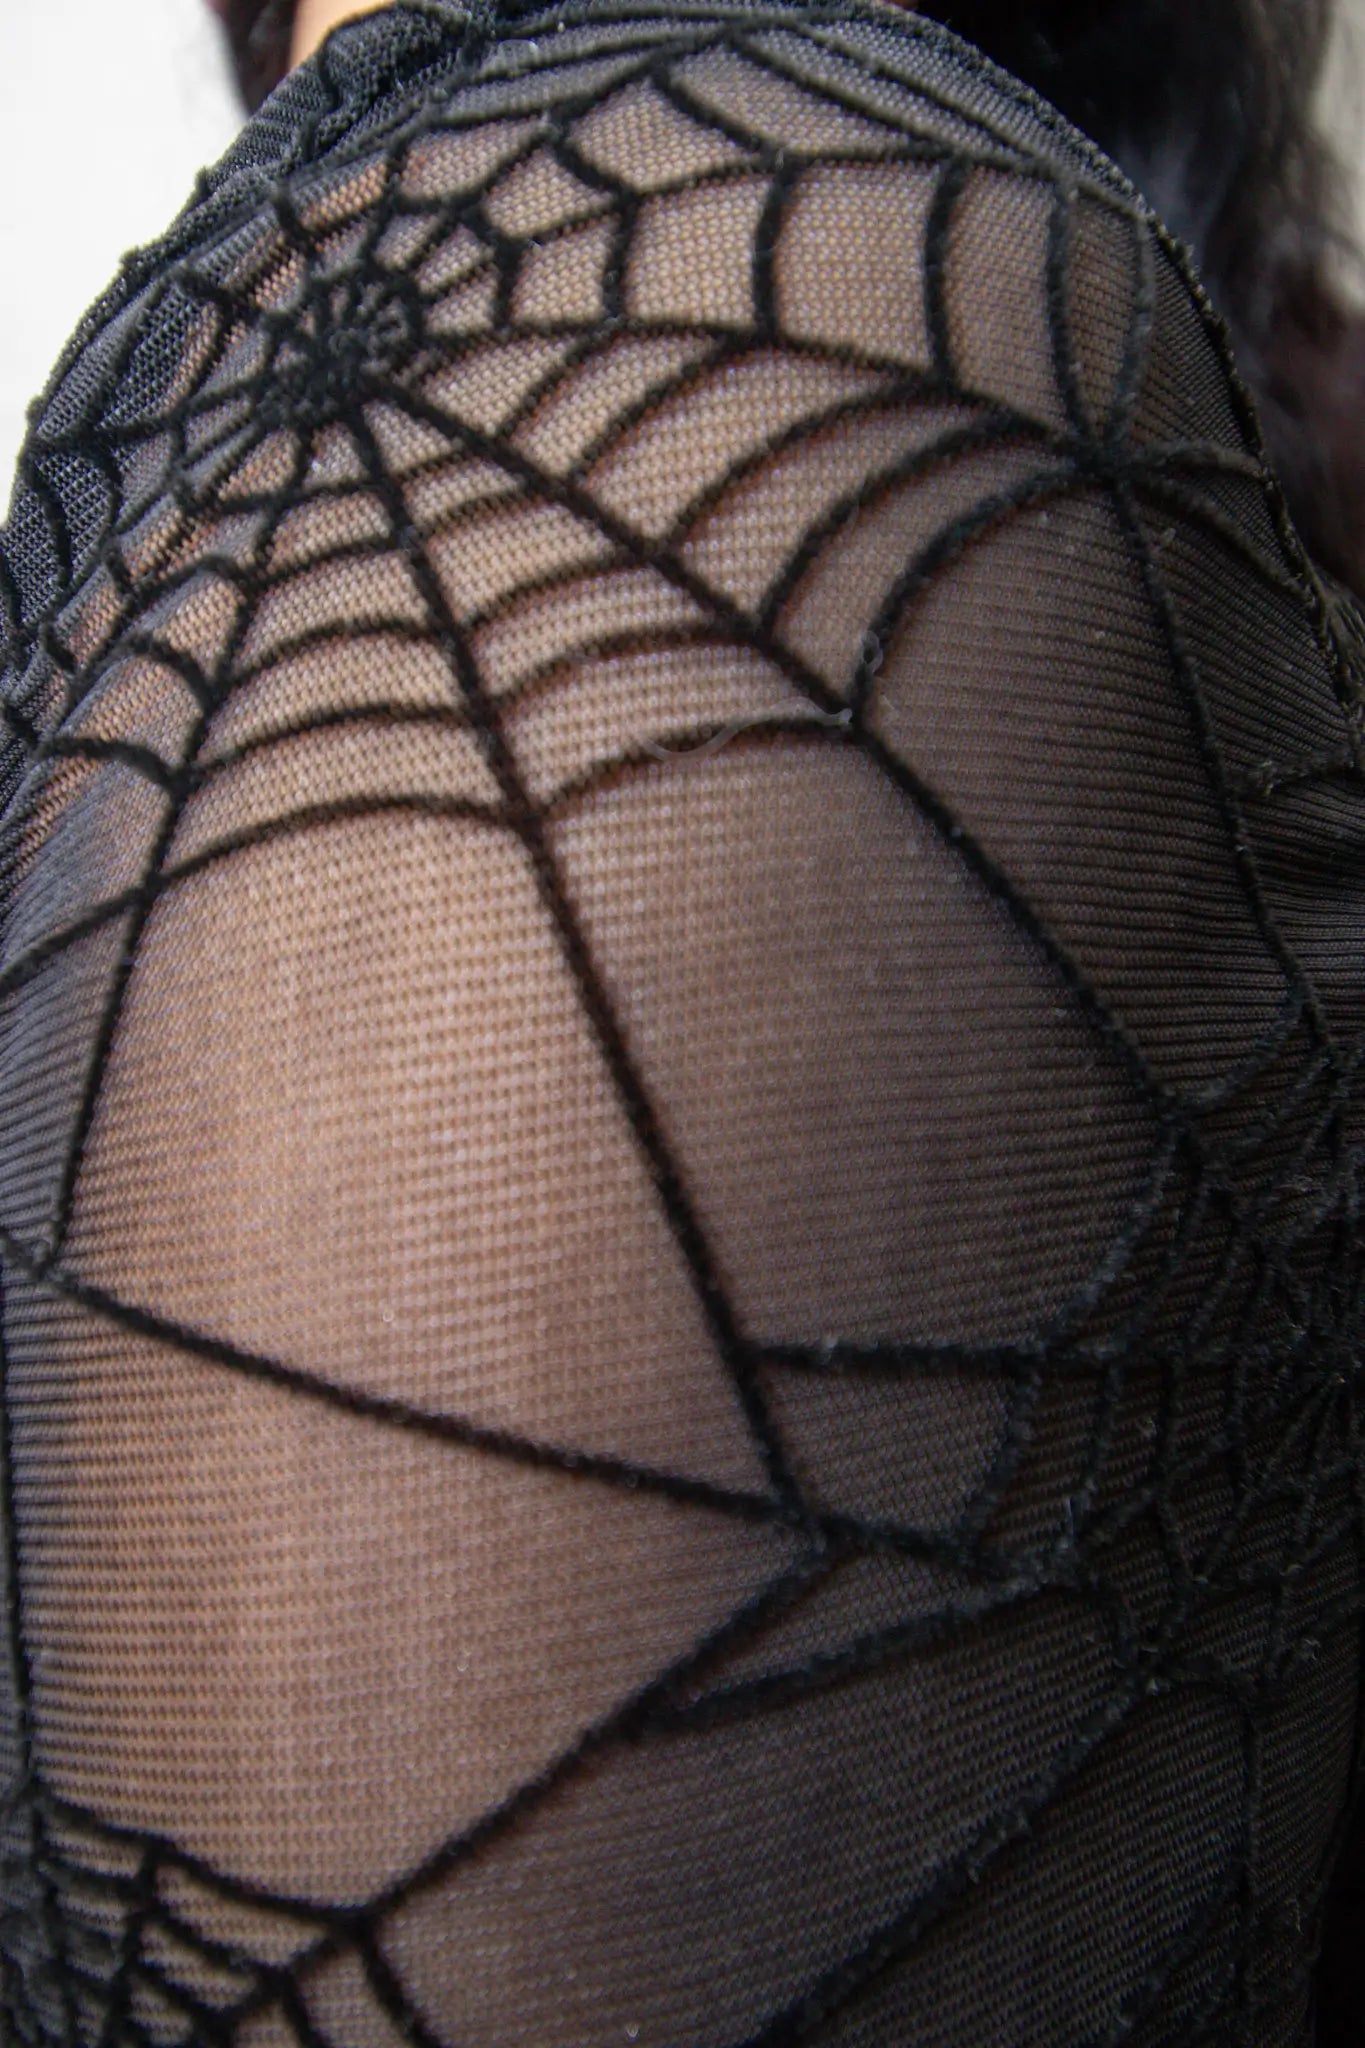 Techno Rave Mesh Spider: Rave Long Sleeve close up